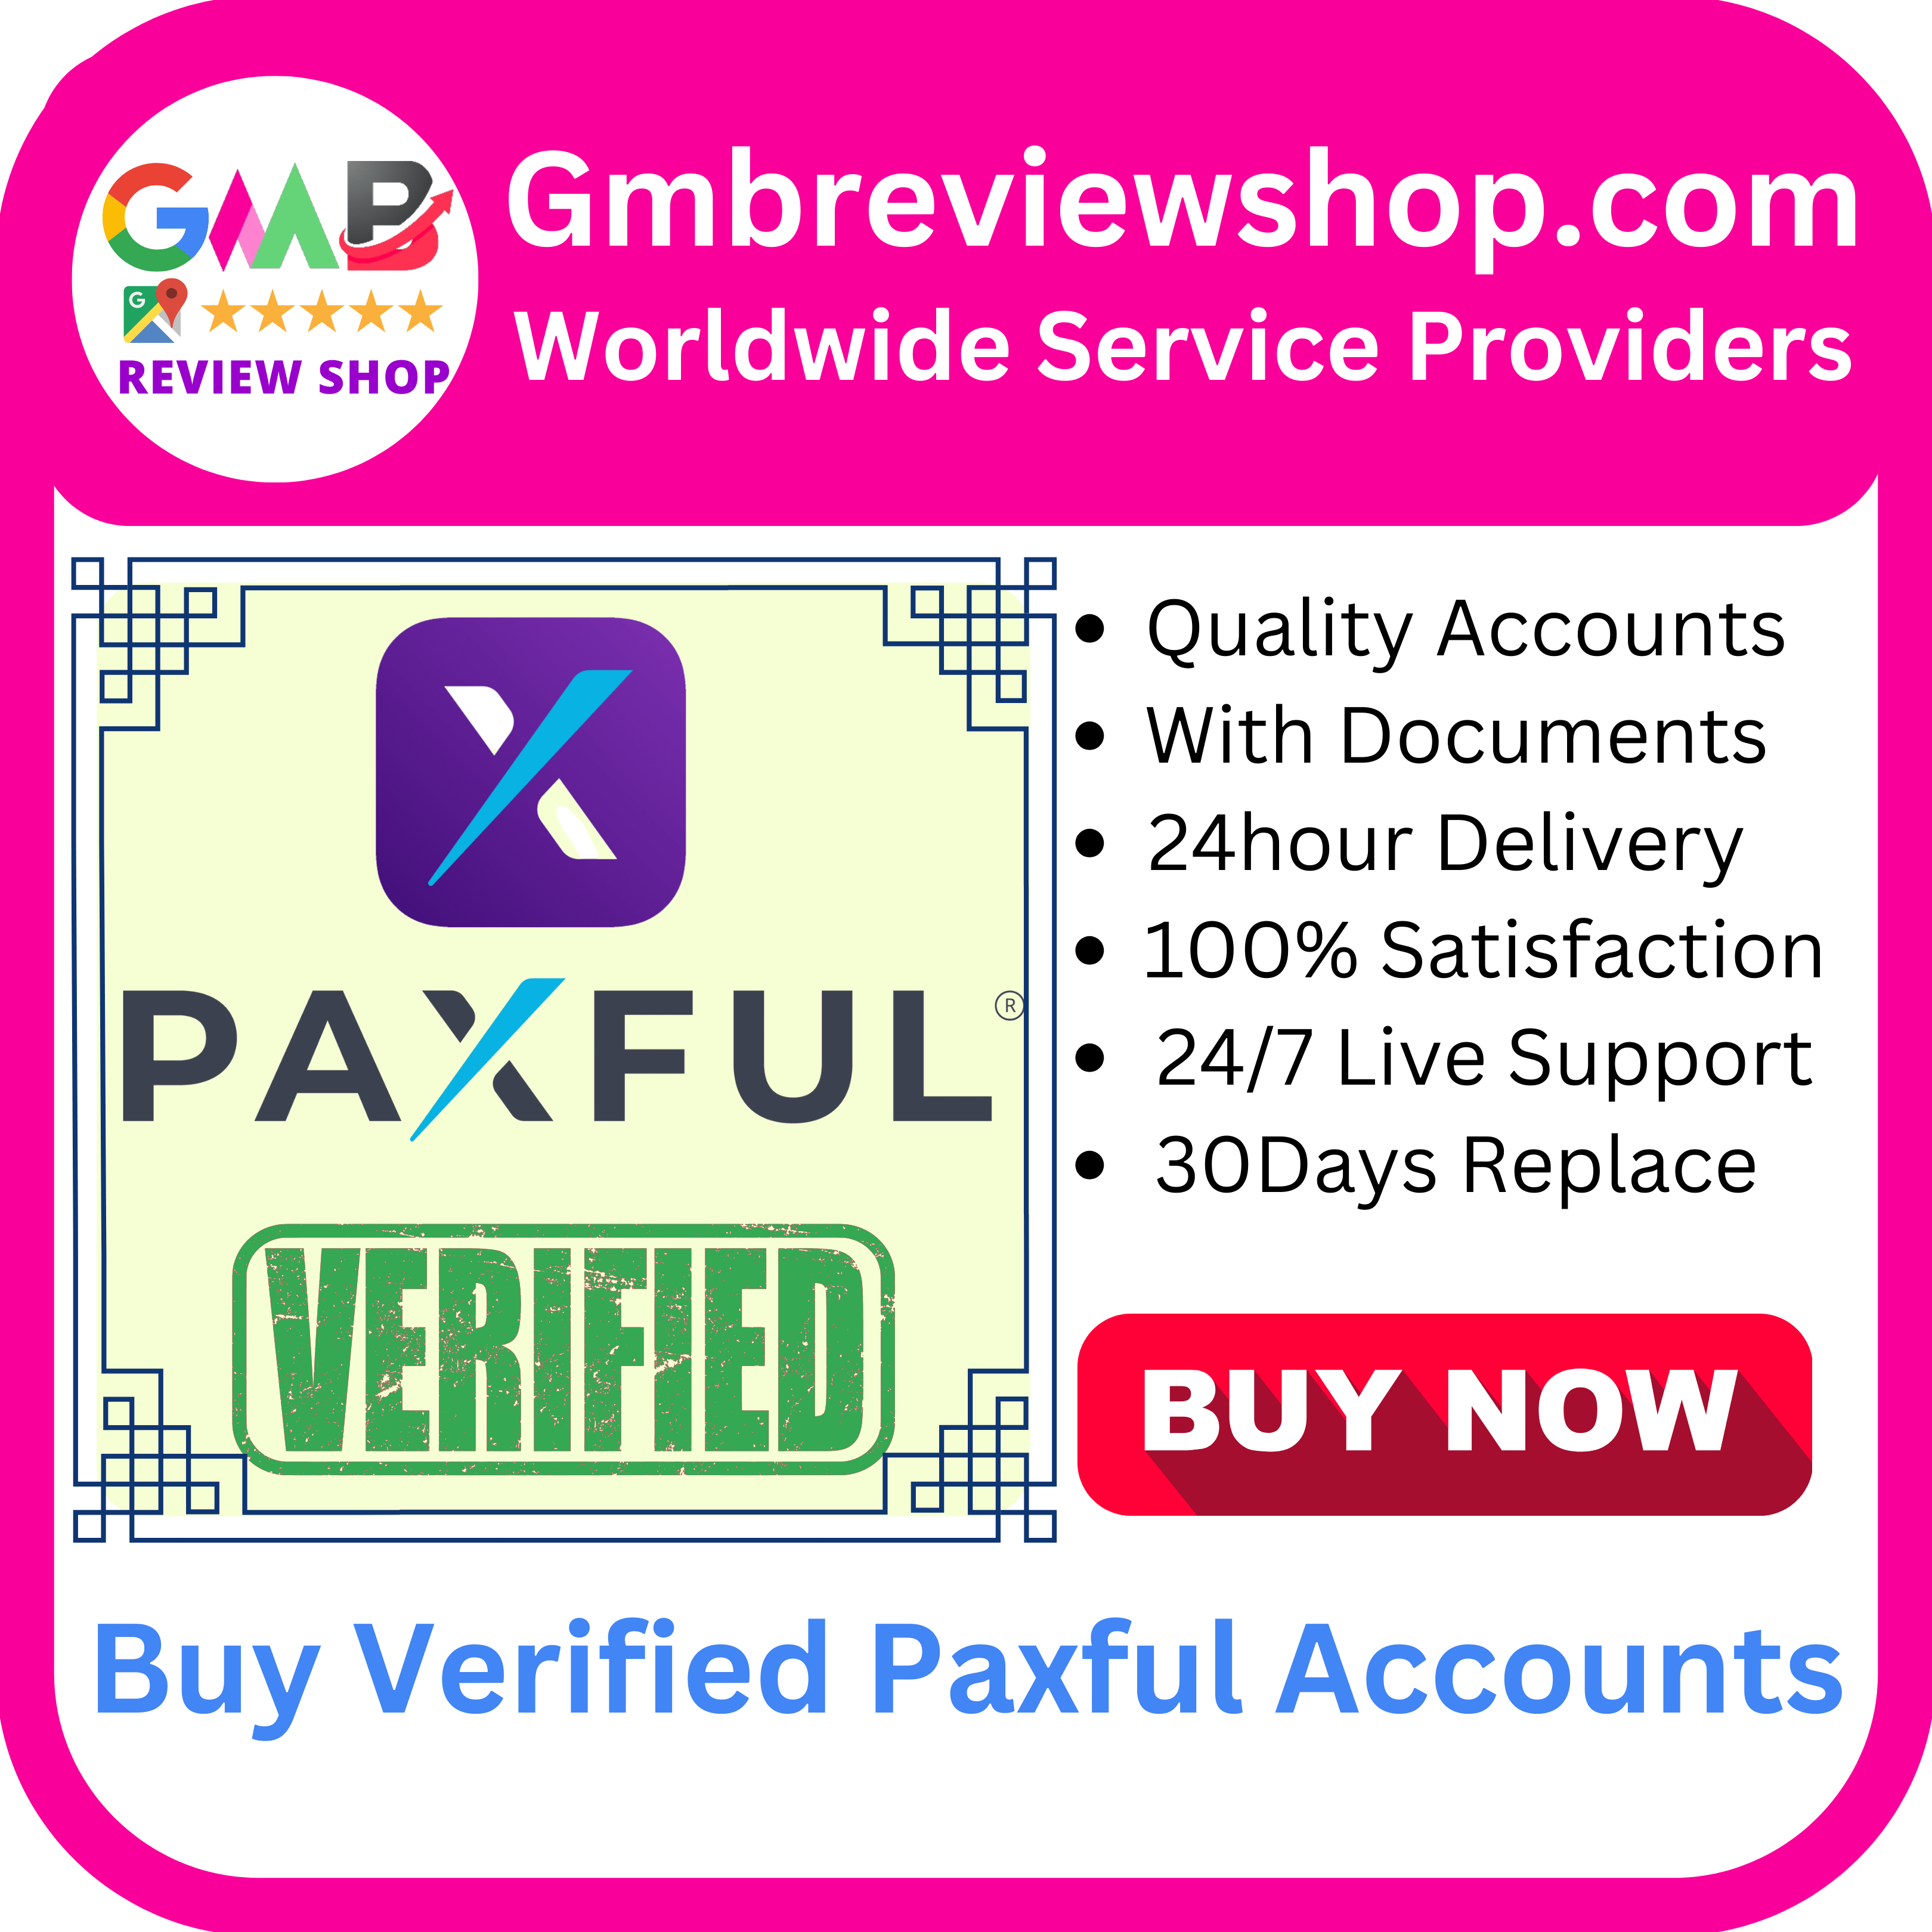 Buy Verified Paxful Accounts - 100% USA,UK,CA Paxful Account